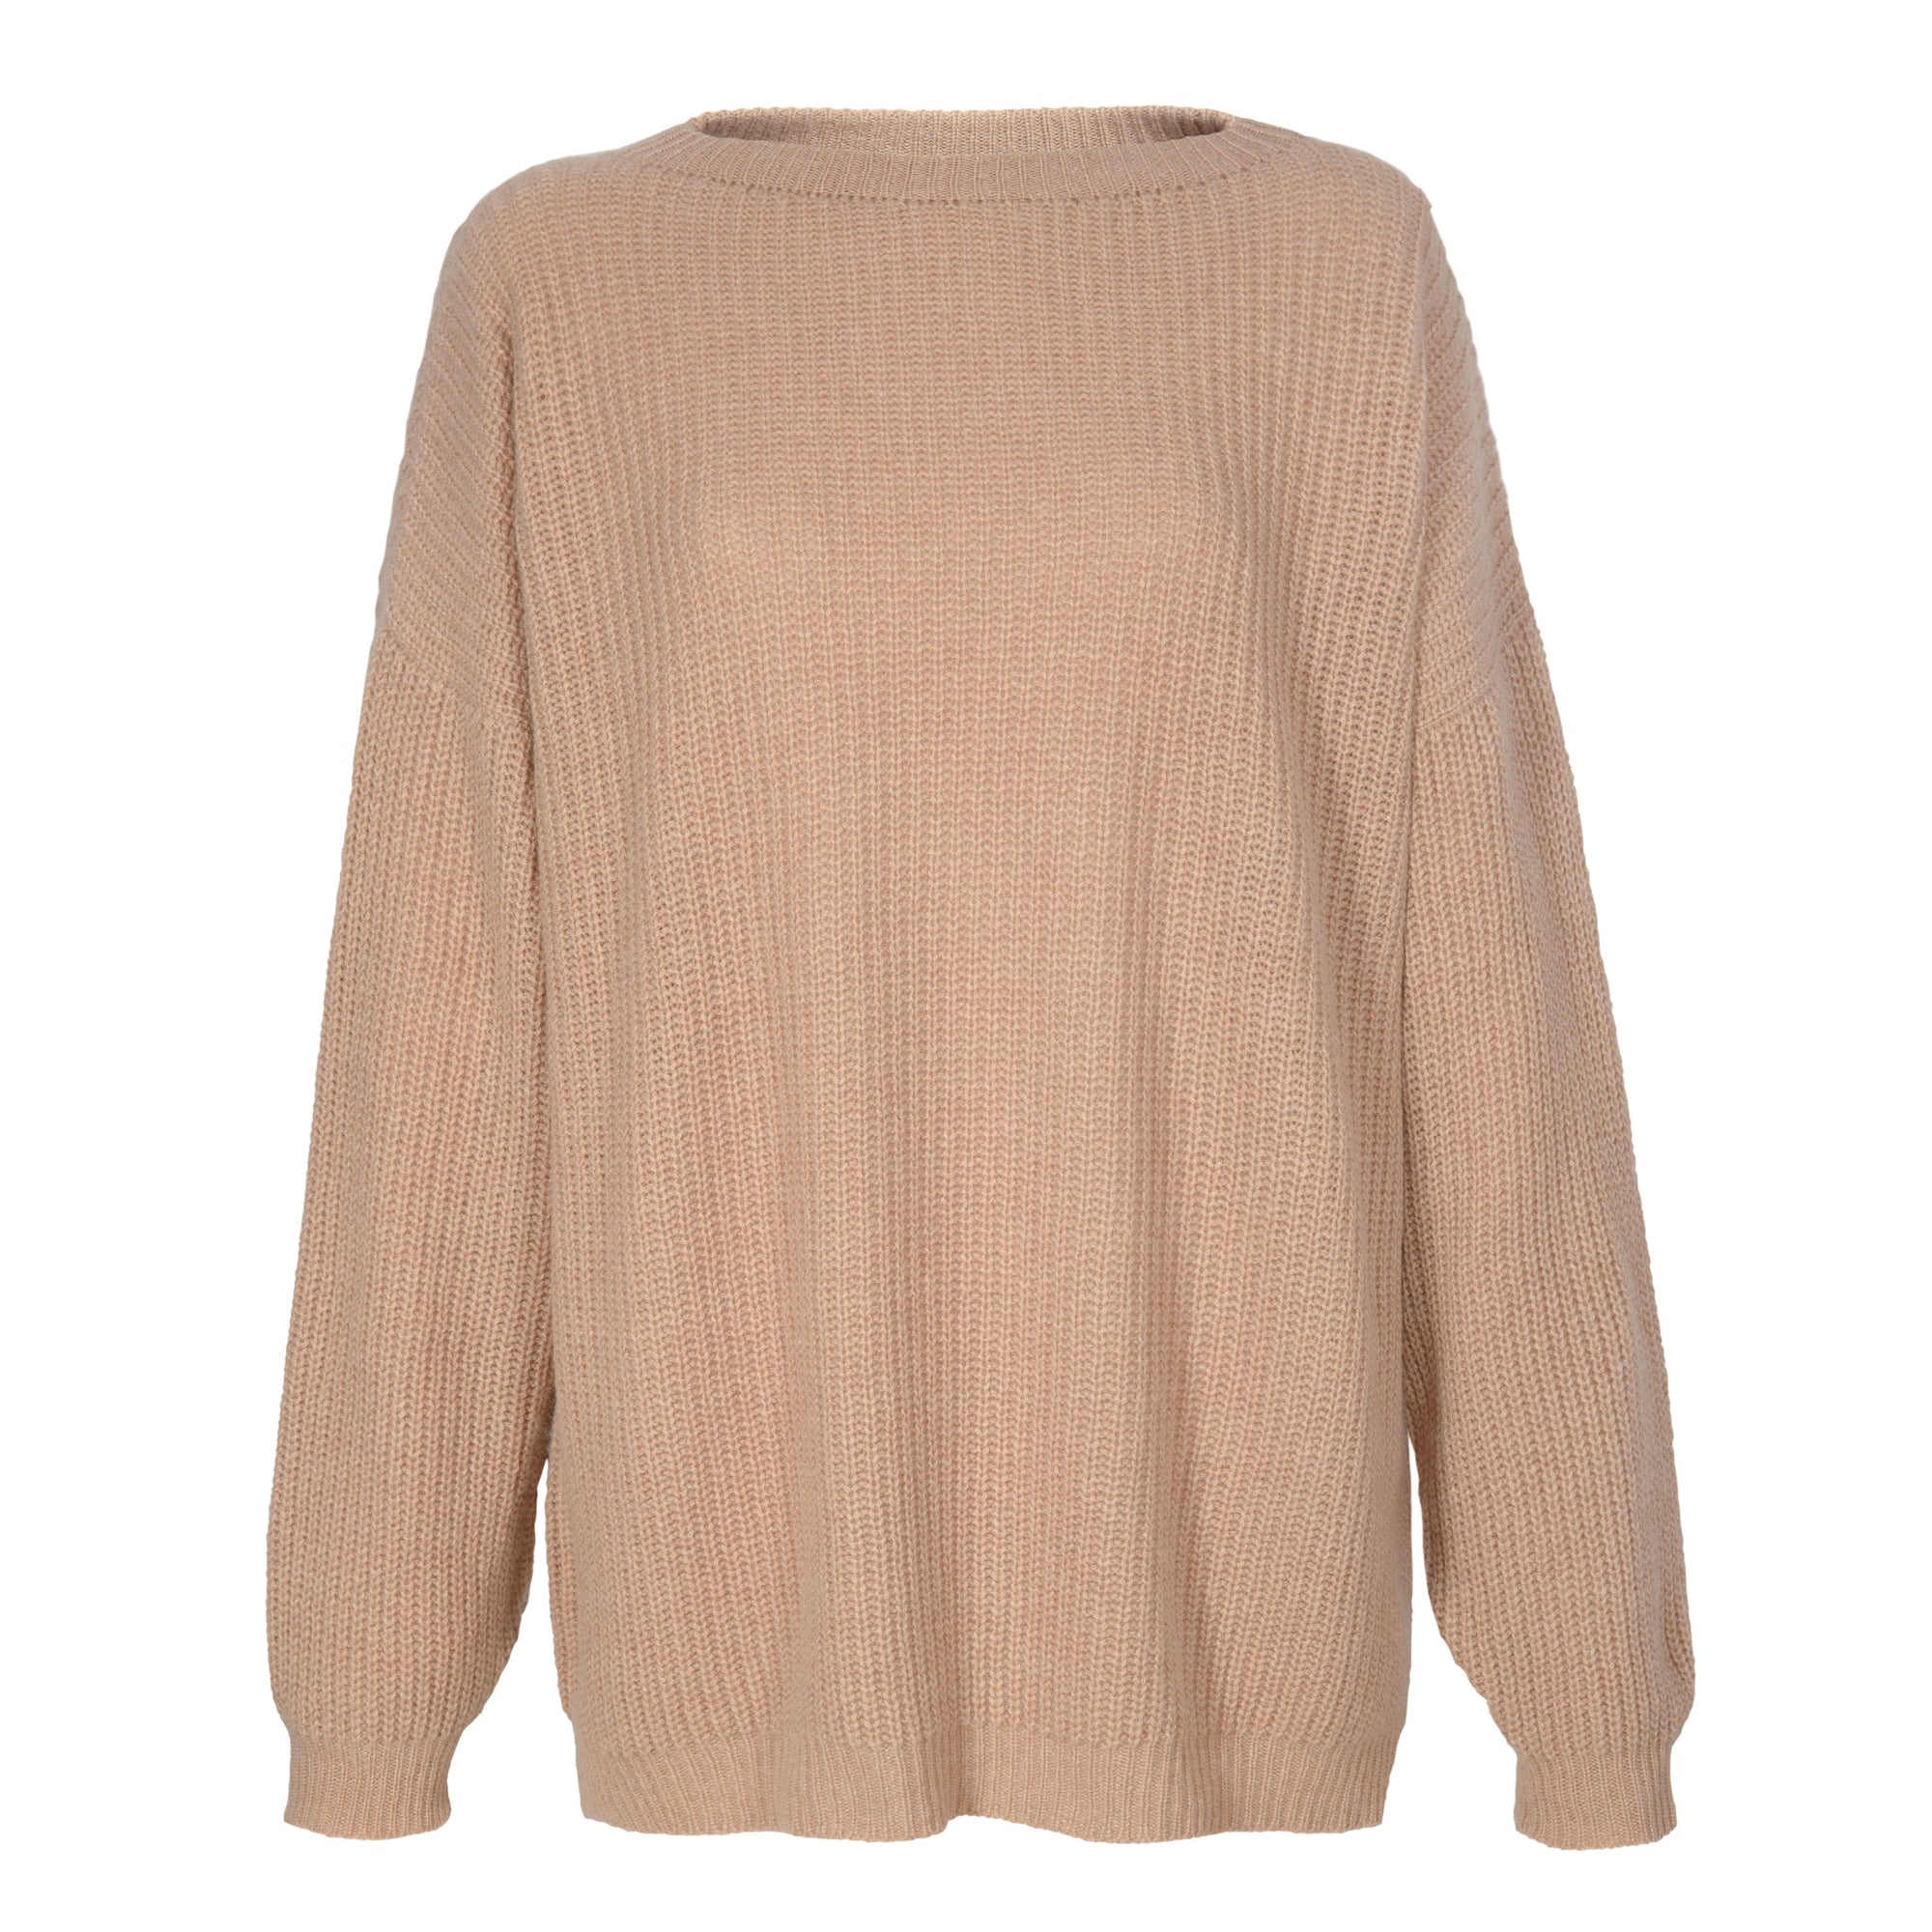 PETITE CALIN Kaschmirpullover, Damenpullover, Cashmere sweater, beige, Jumper, Camel, Women clothing, Handmade, Zero waste, Fair trade, Organic, Handcrafted, Handmade, Made in Europe, Made in Germany, Female Empowerment, Shop now - the wearness online-shop - ETHICAL & SUSTAINABLE LUXURY FASHION 